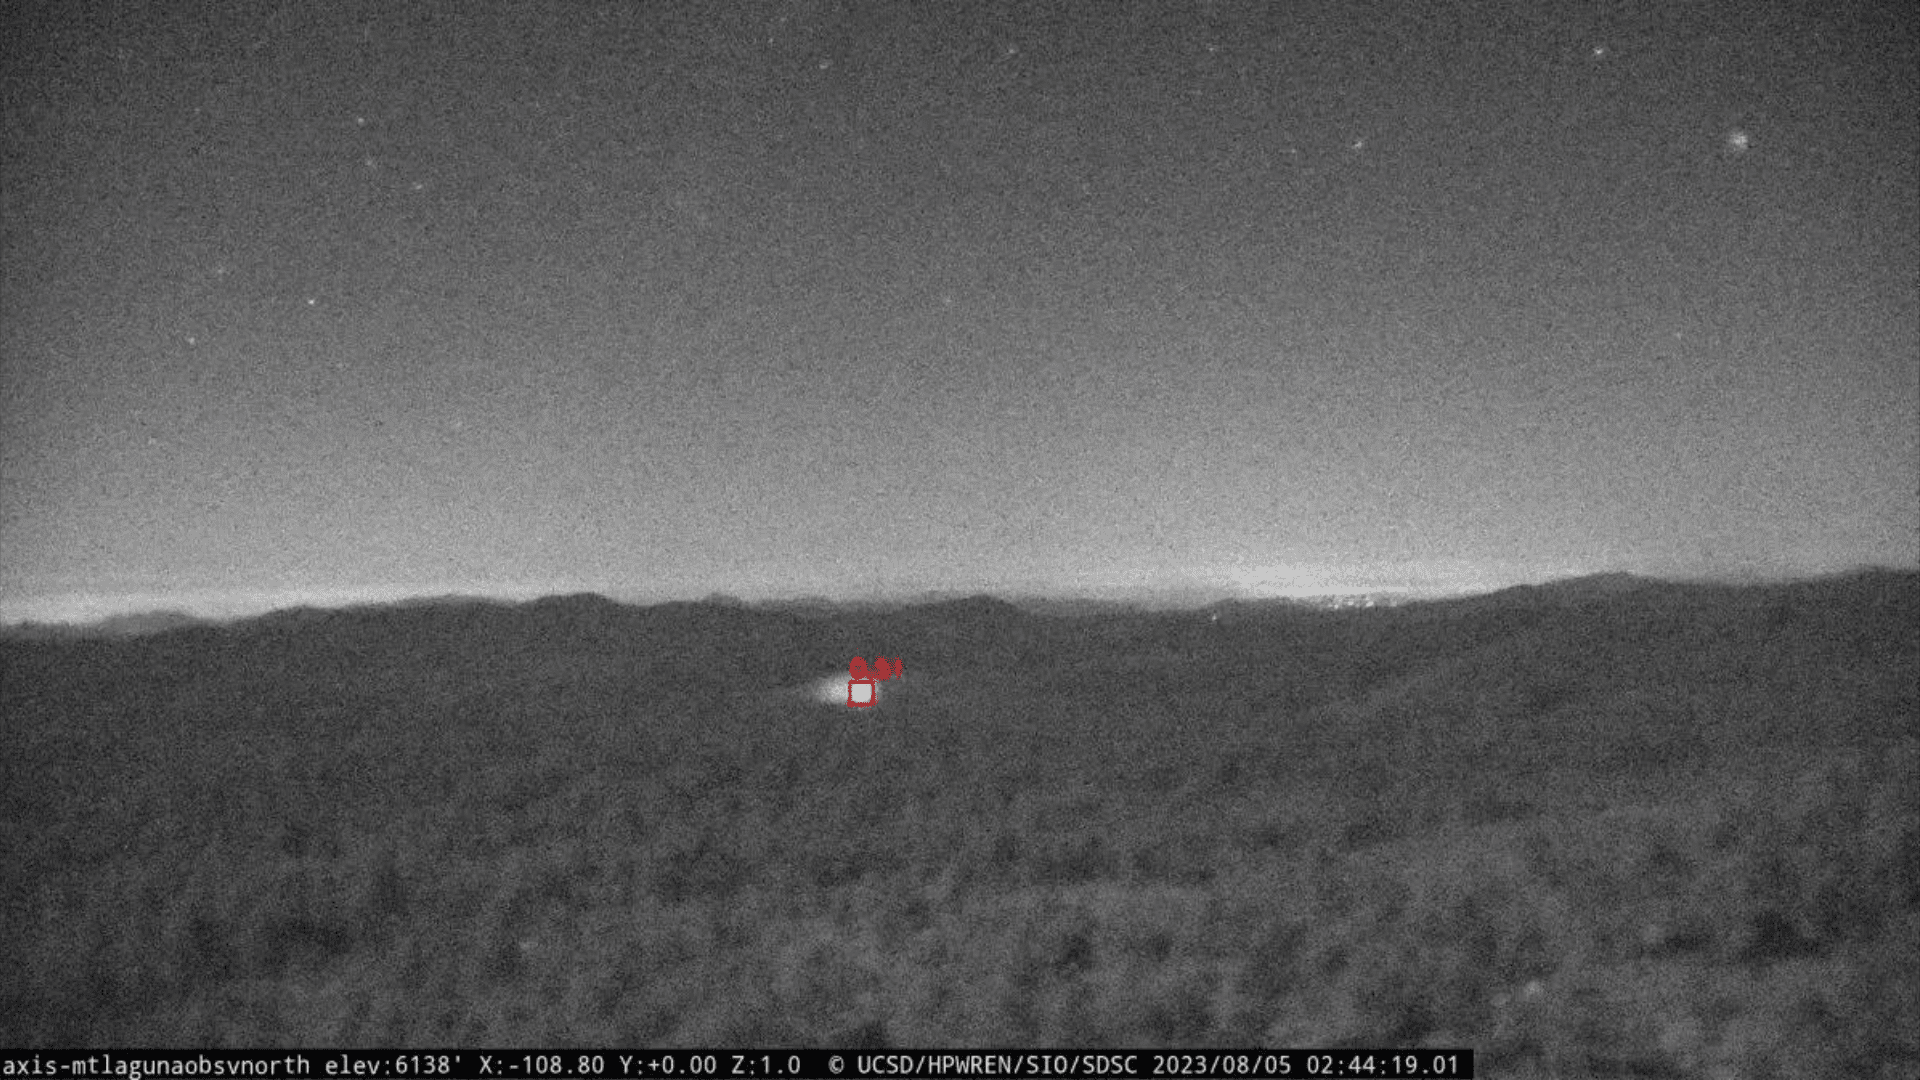 A red box highlights an anomaly detected by AI on Mount Laguna in San Diego County